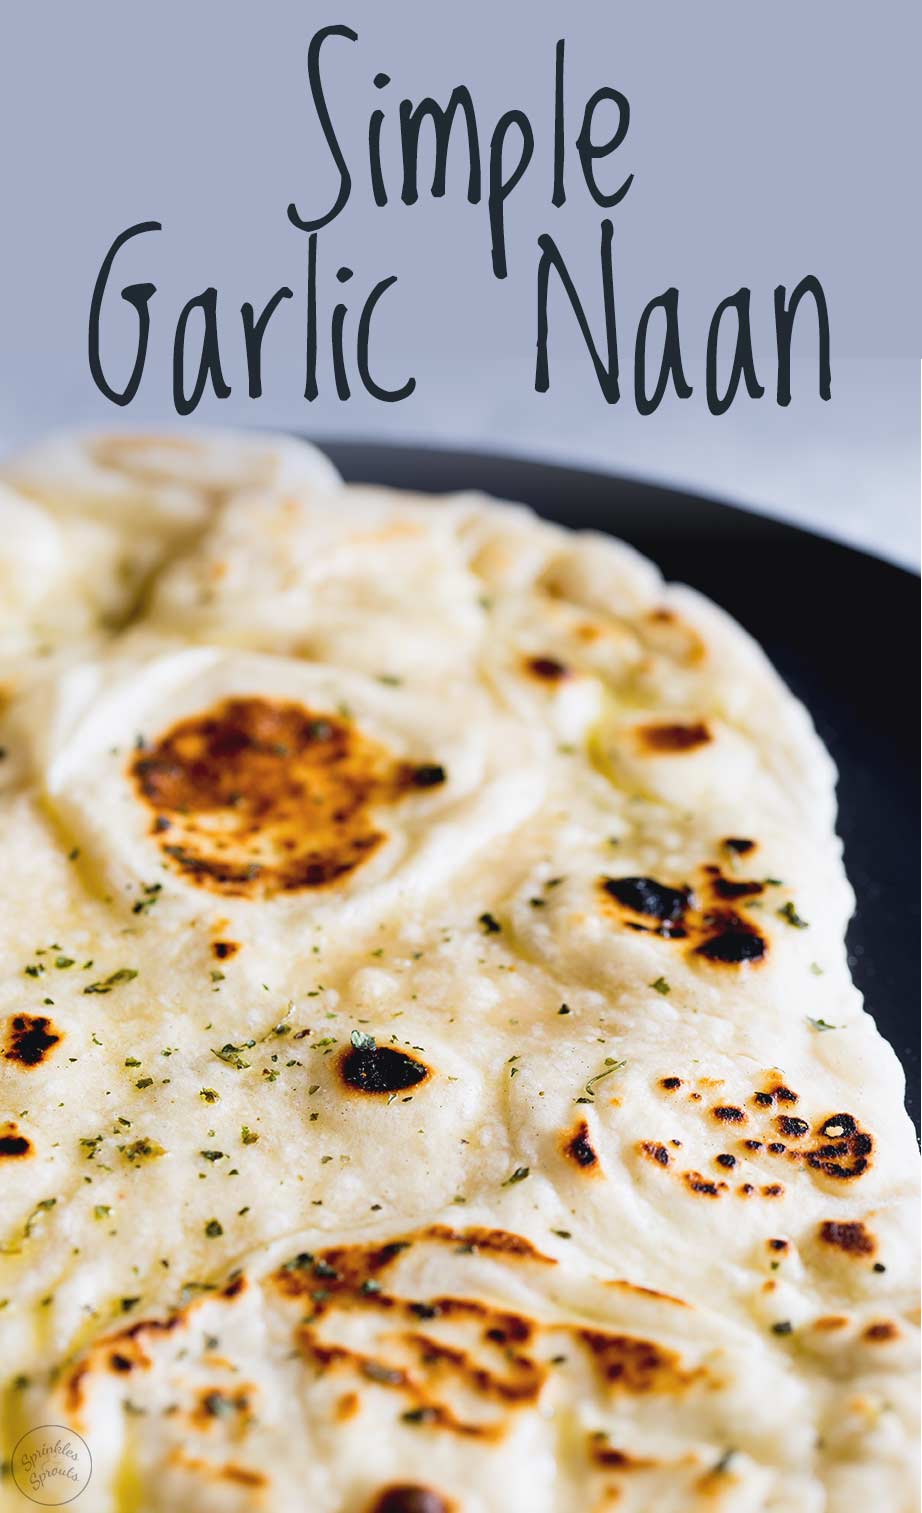 shot of the blackened spots on the garlic naan